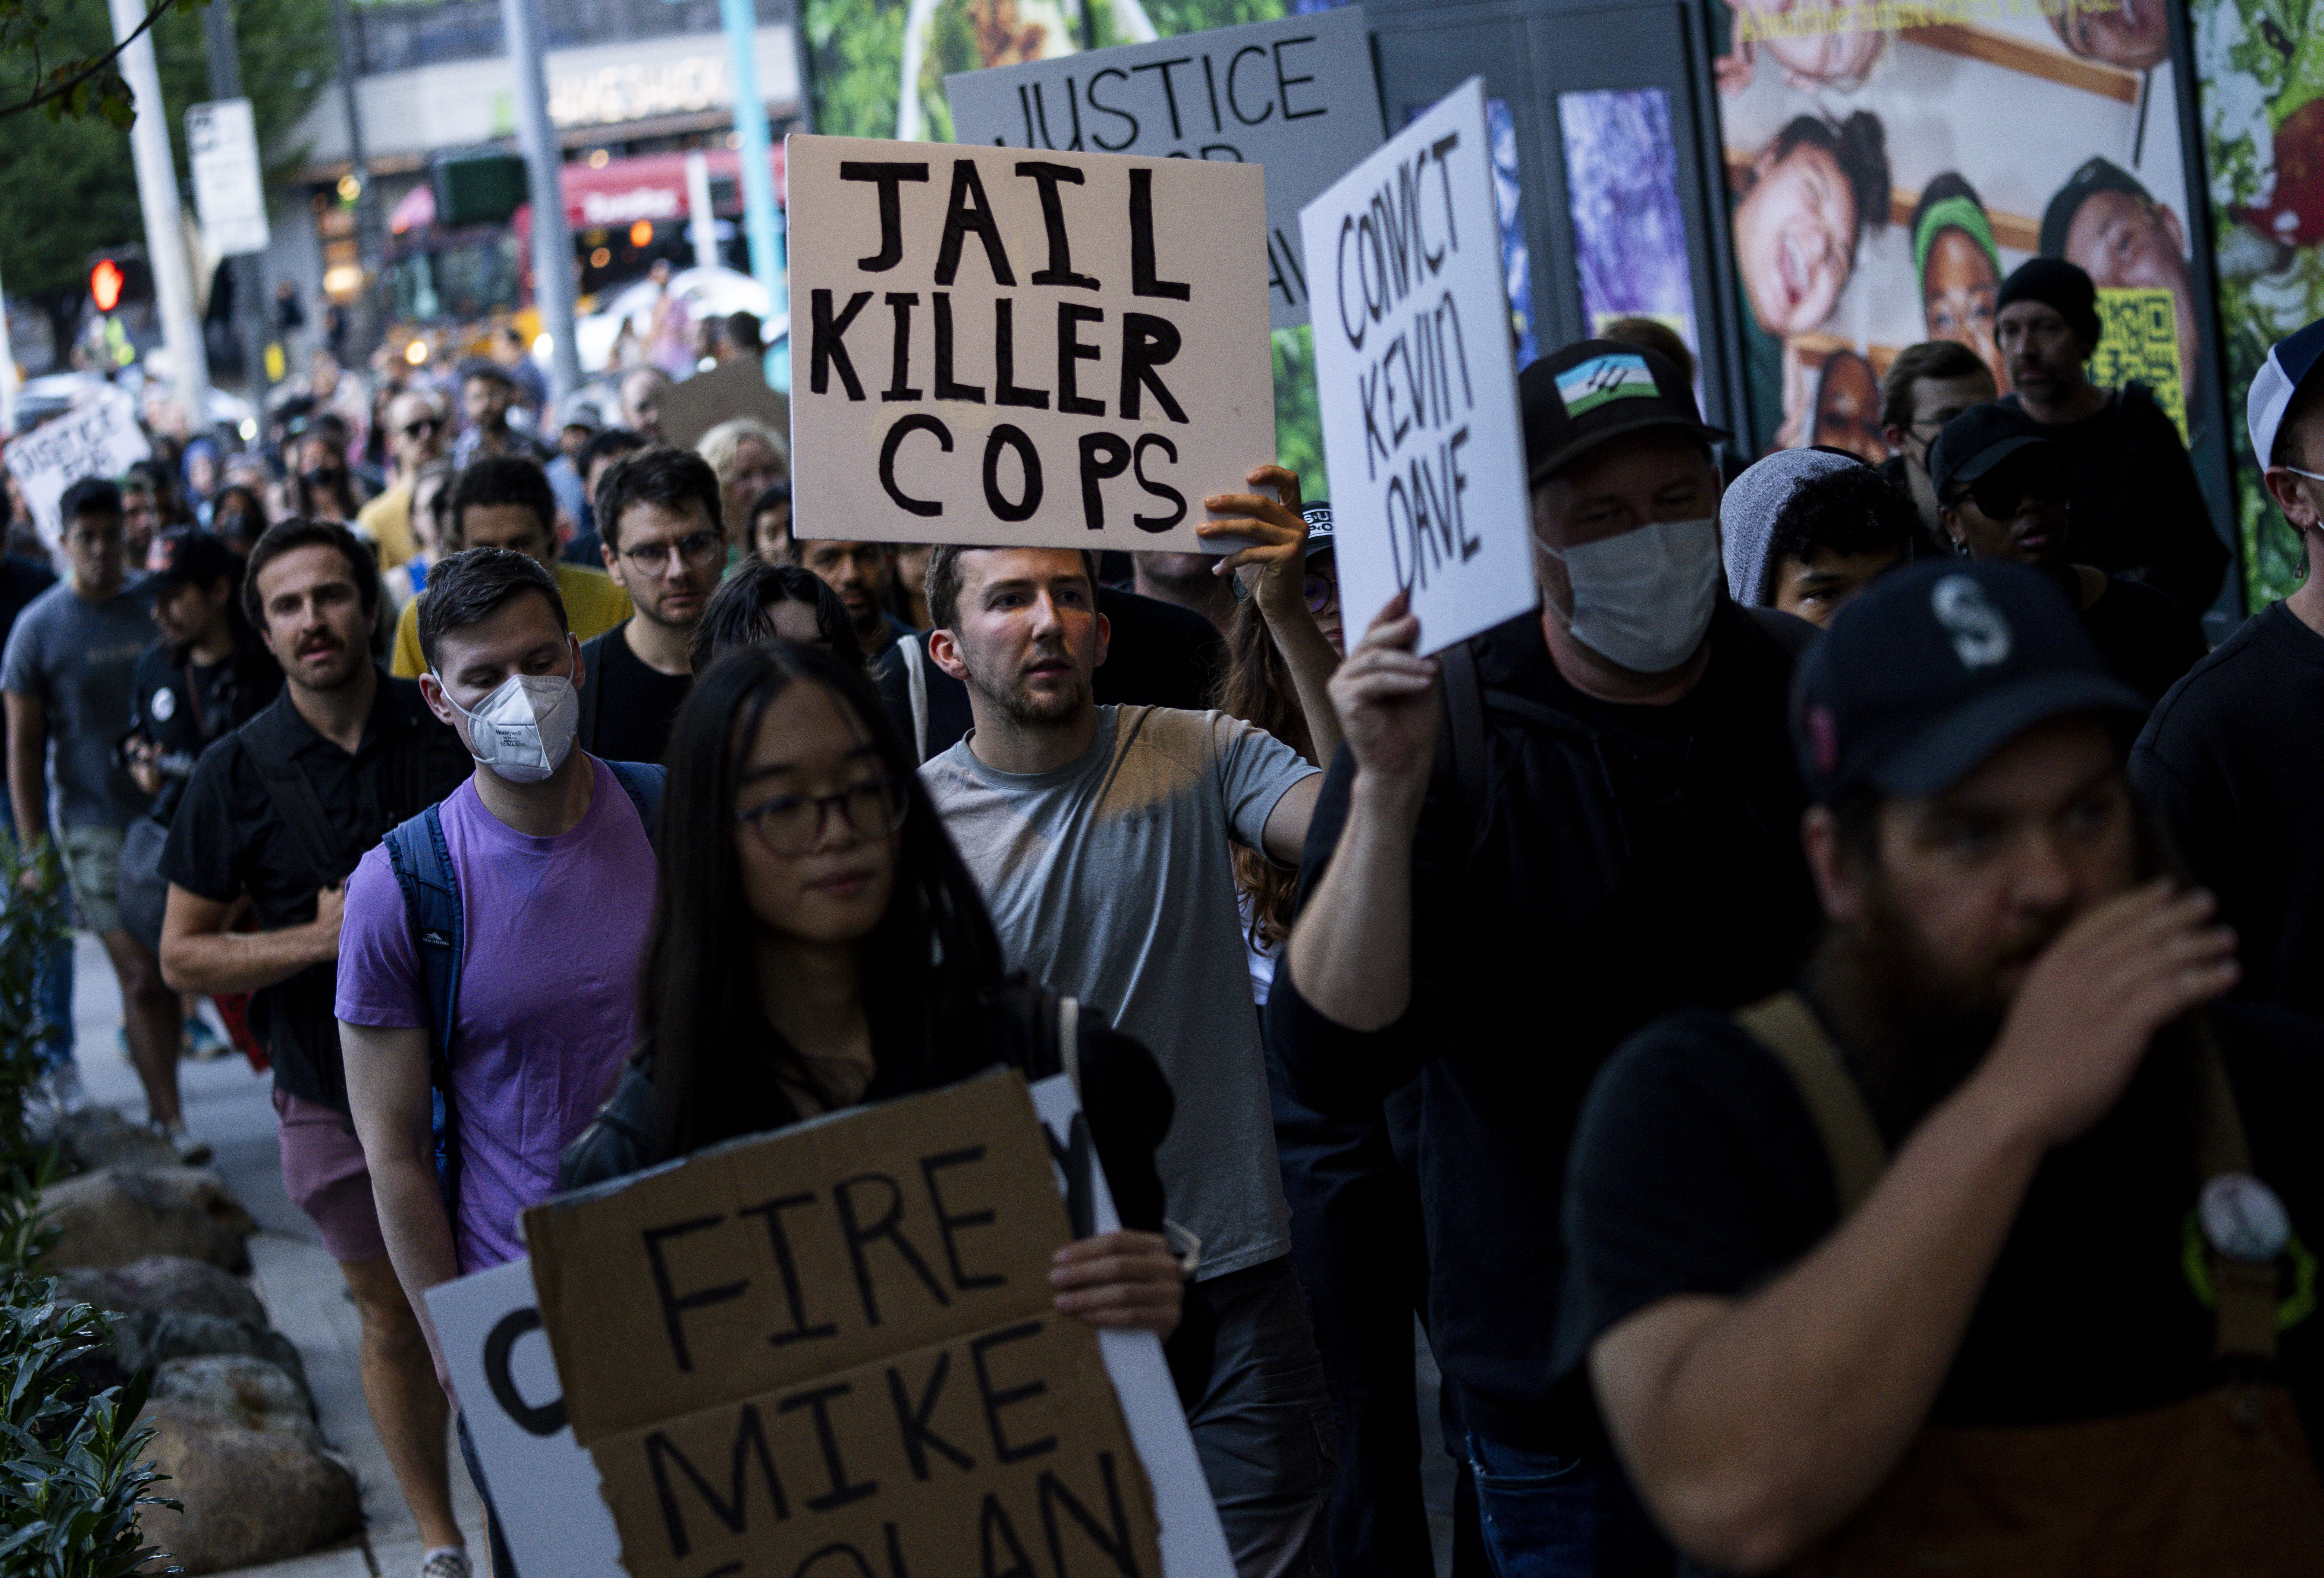 FILE - Protesters march through downtown Seattle after body camera footage was released of a Seattle police officer joking about the death of Jaahnavi Kandula, a 23-year-old woman hit and killed in January by officer Kevin Dave in a police cruiser, Sept. 14, 2023, in Seattle. A Seattle police officer and union leader under investigation for laughing and making callous remarks about the death of Kandula, from India, who was struck by a police SUV, has been taken off patrol duty, police said Thursday, Sept. 28. (AP Photo/Lindsey Wasson, File)